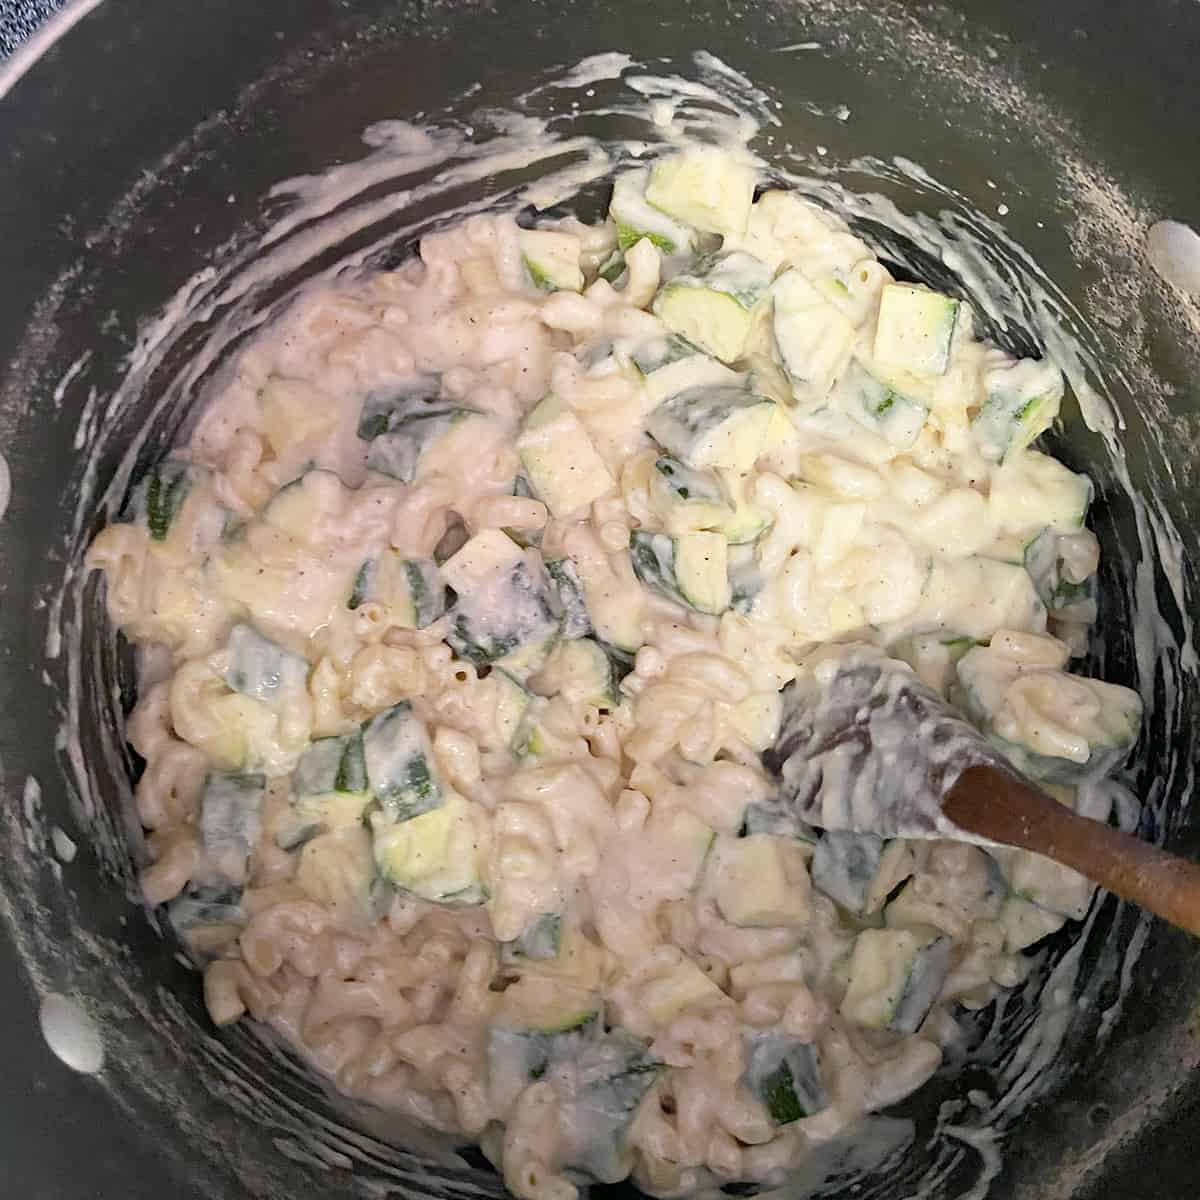 Dish where zucchini, macaroni, and cheese sauce are being mixed with a wooden spoon.